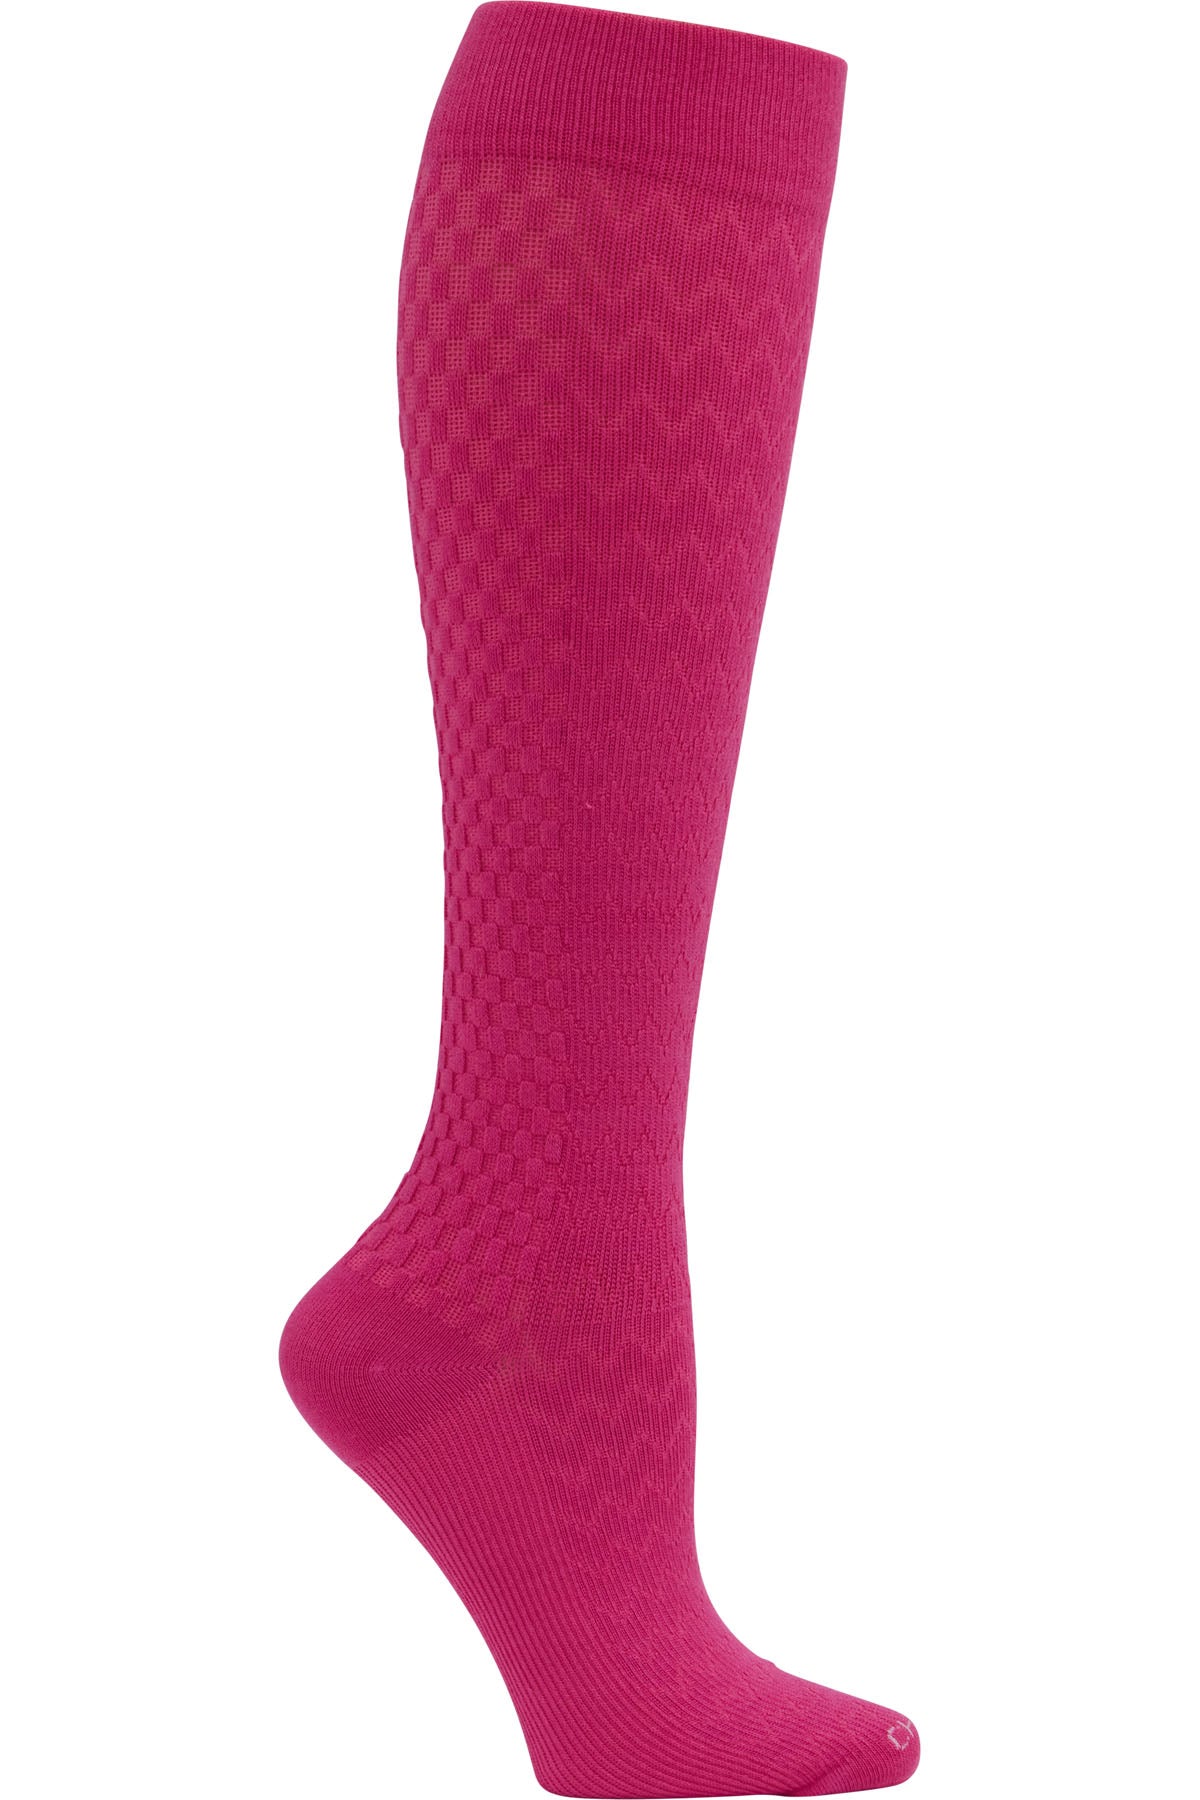 Cherokee Mild Compression Socks True Support 10-15 mmHg in Brilliant at Parker's Clothing and Shoes.